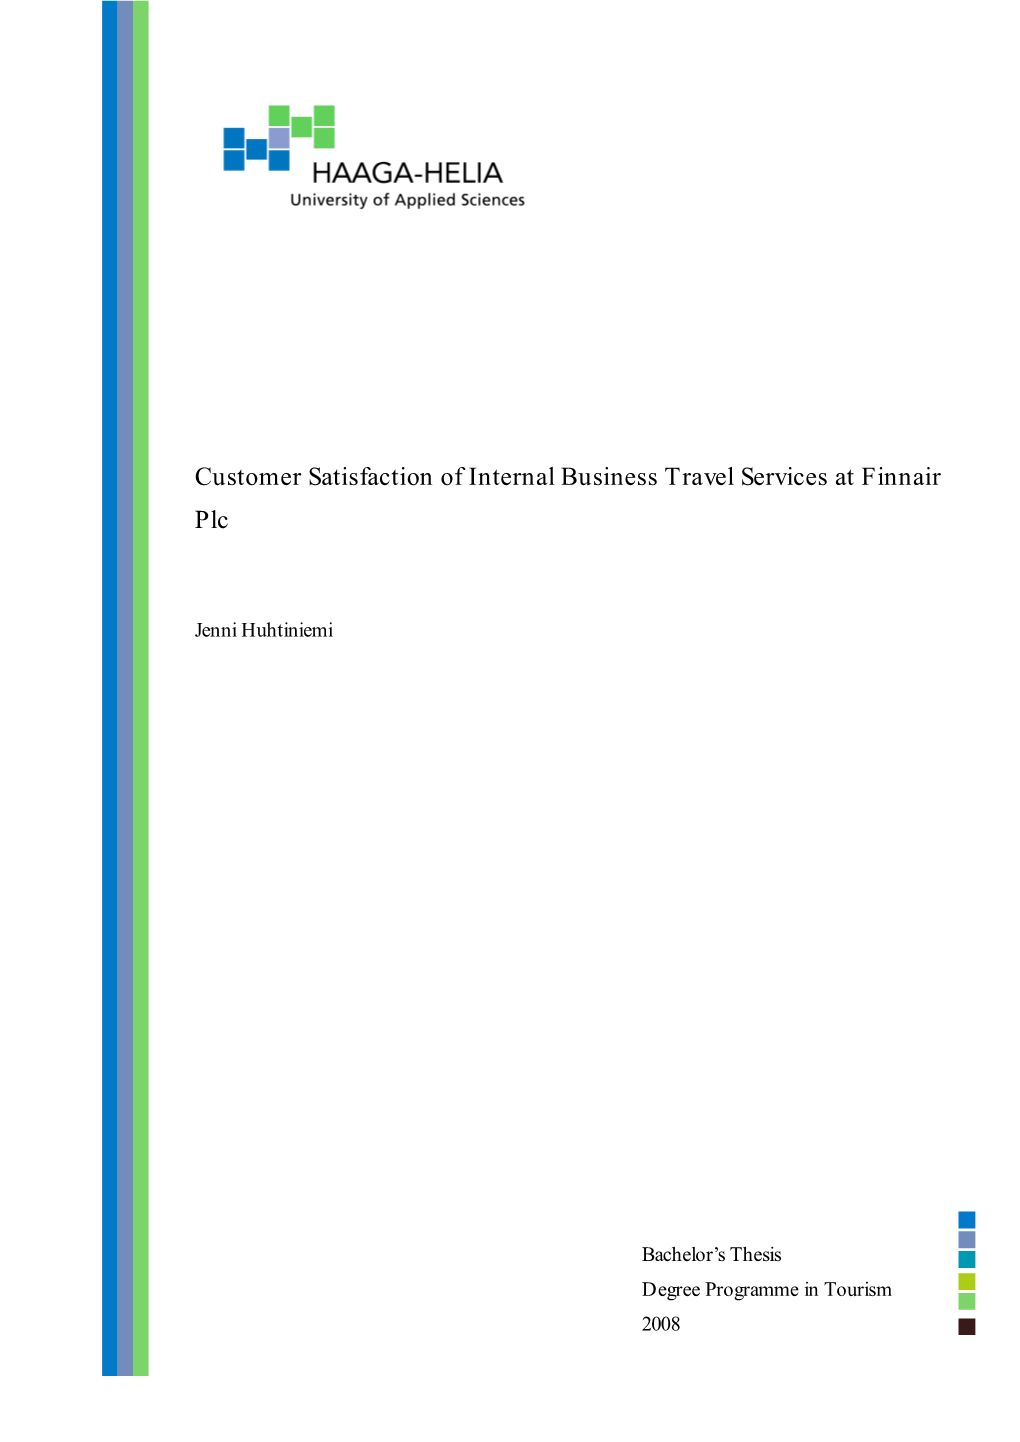 Customer Satisfaction of Internal Business Travel Services at Finnair Plc